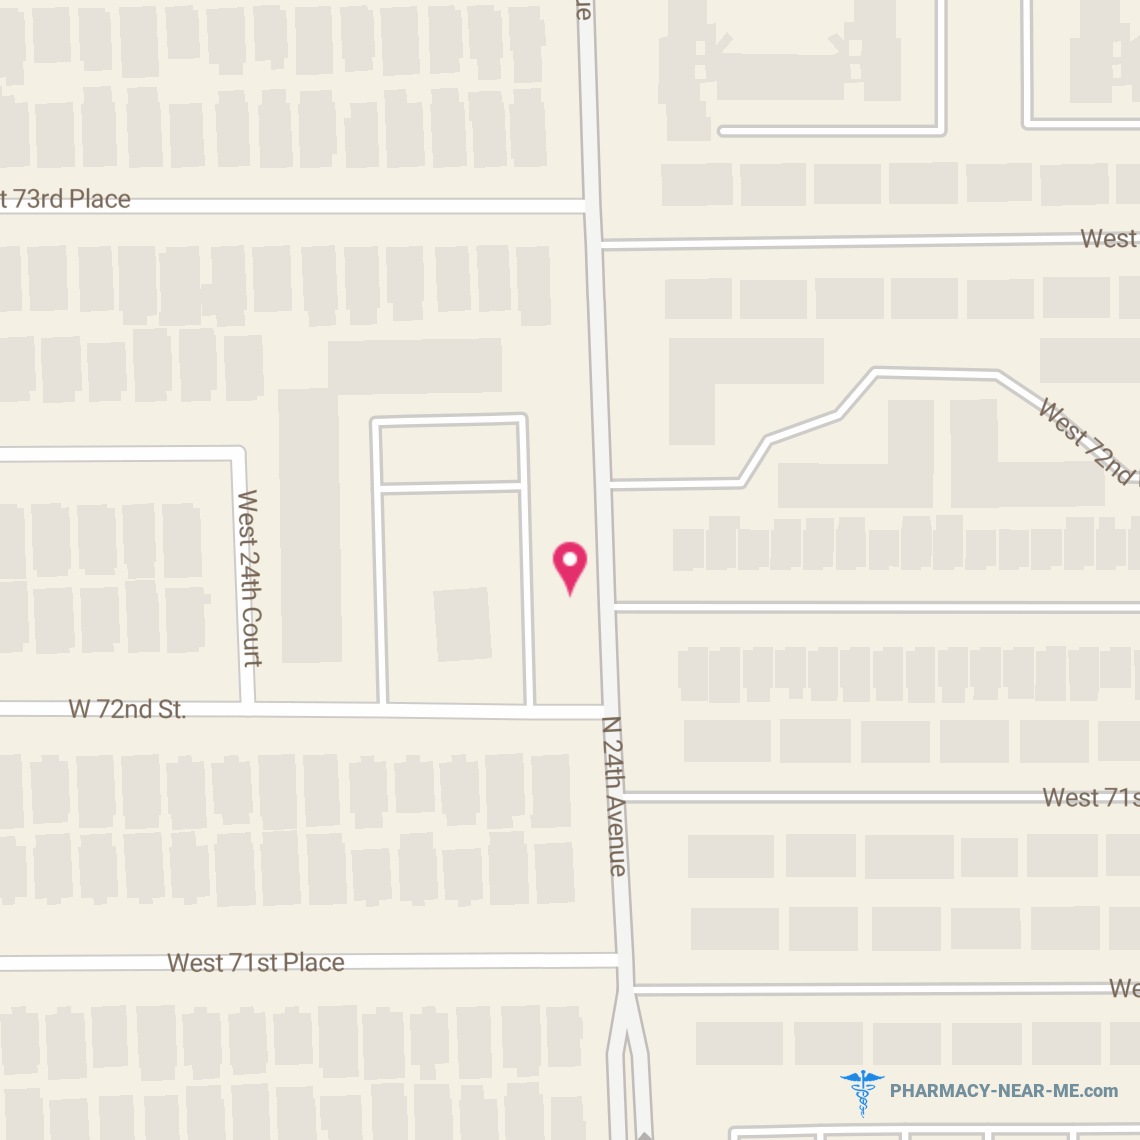 J AND J PHARMACY INC - Pharmacy Hours, Phone, Reviews & Information: 7250 W 24th Ave, Hialeah, Florida 33016, United States